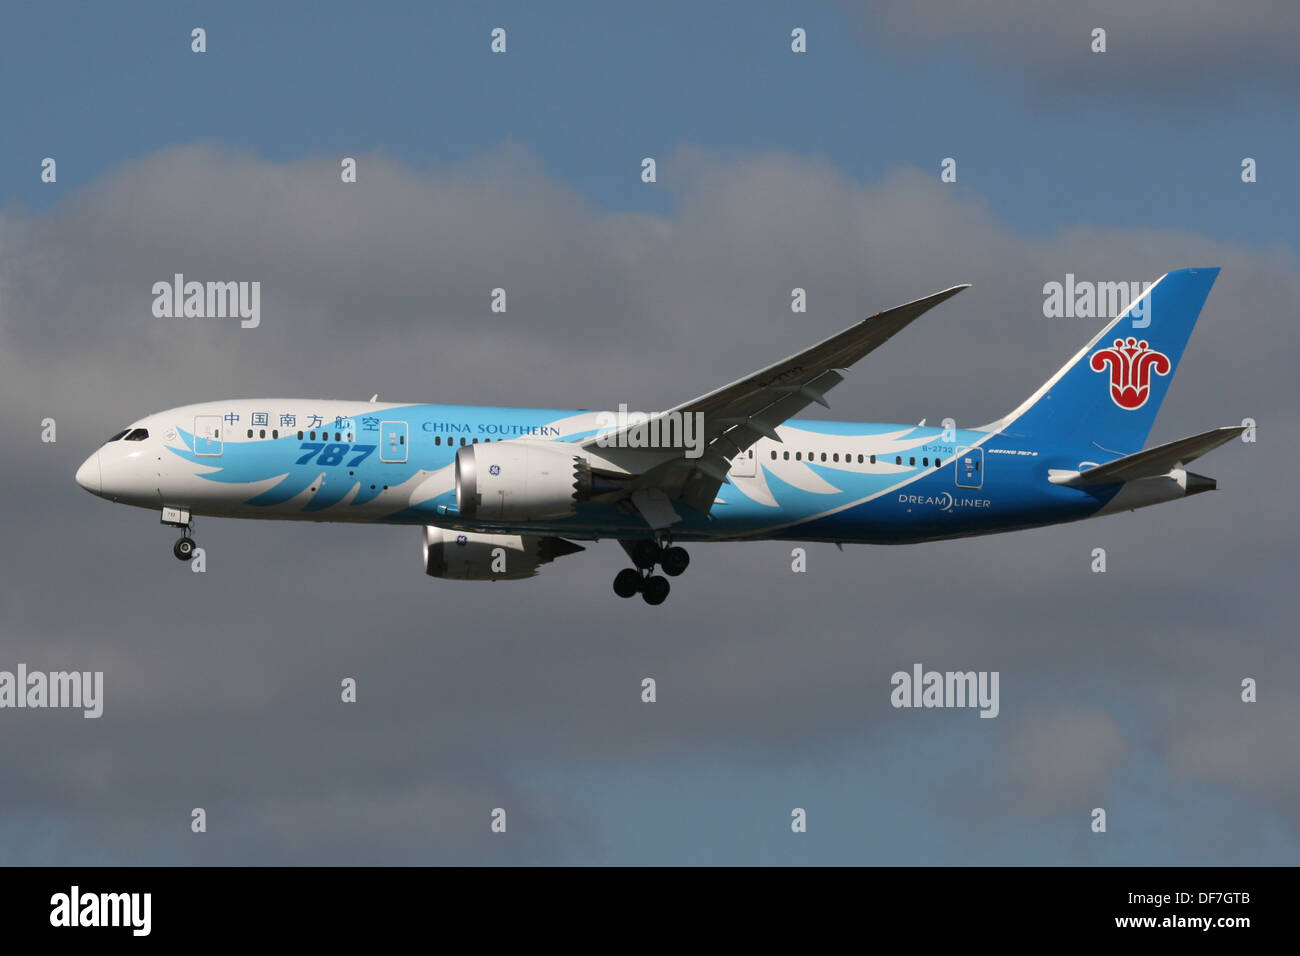 CHINA SOUTHERN BOEING 787 Foto Stock